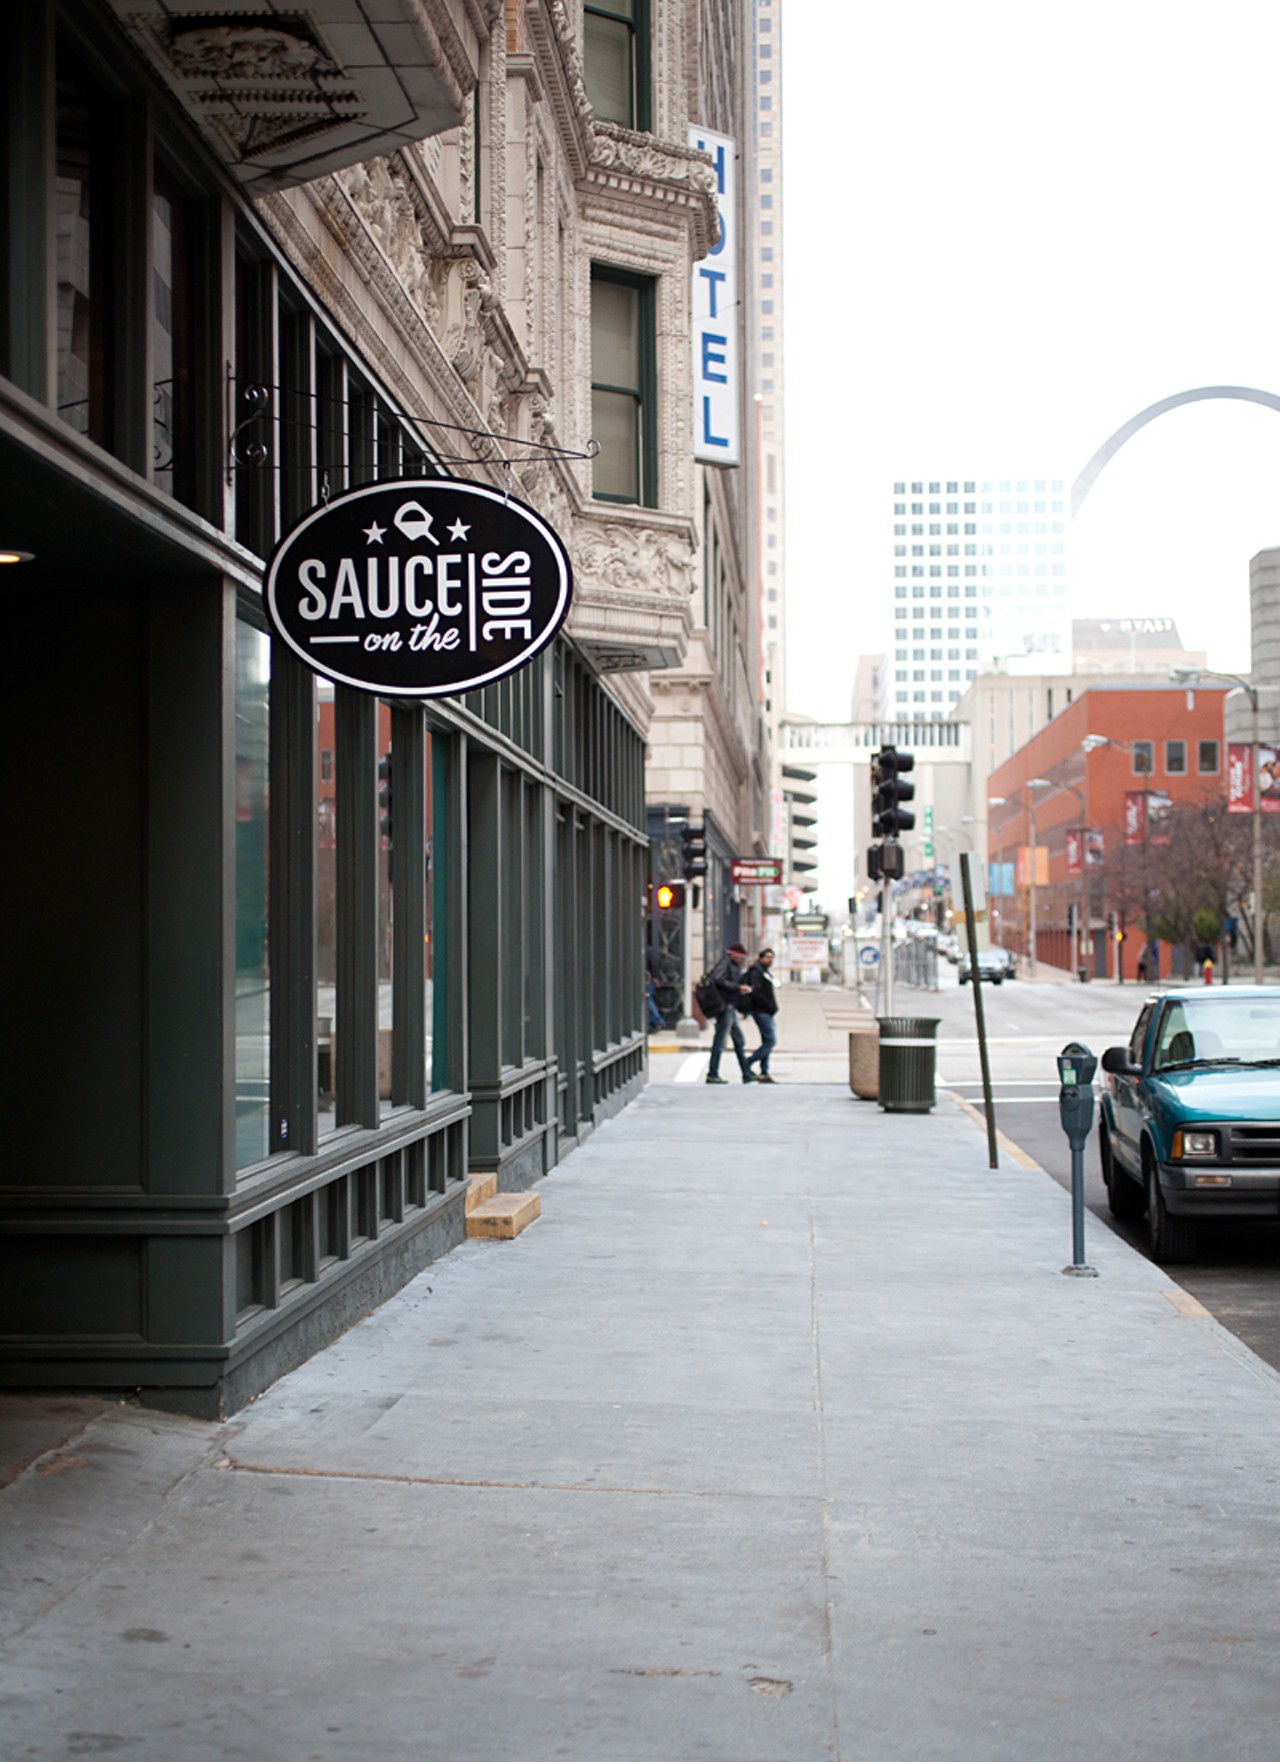 Sauce on the Side, located at Ninth and Pine streets.